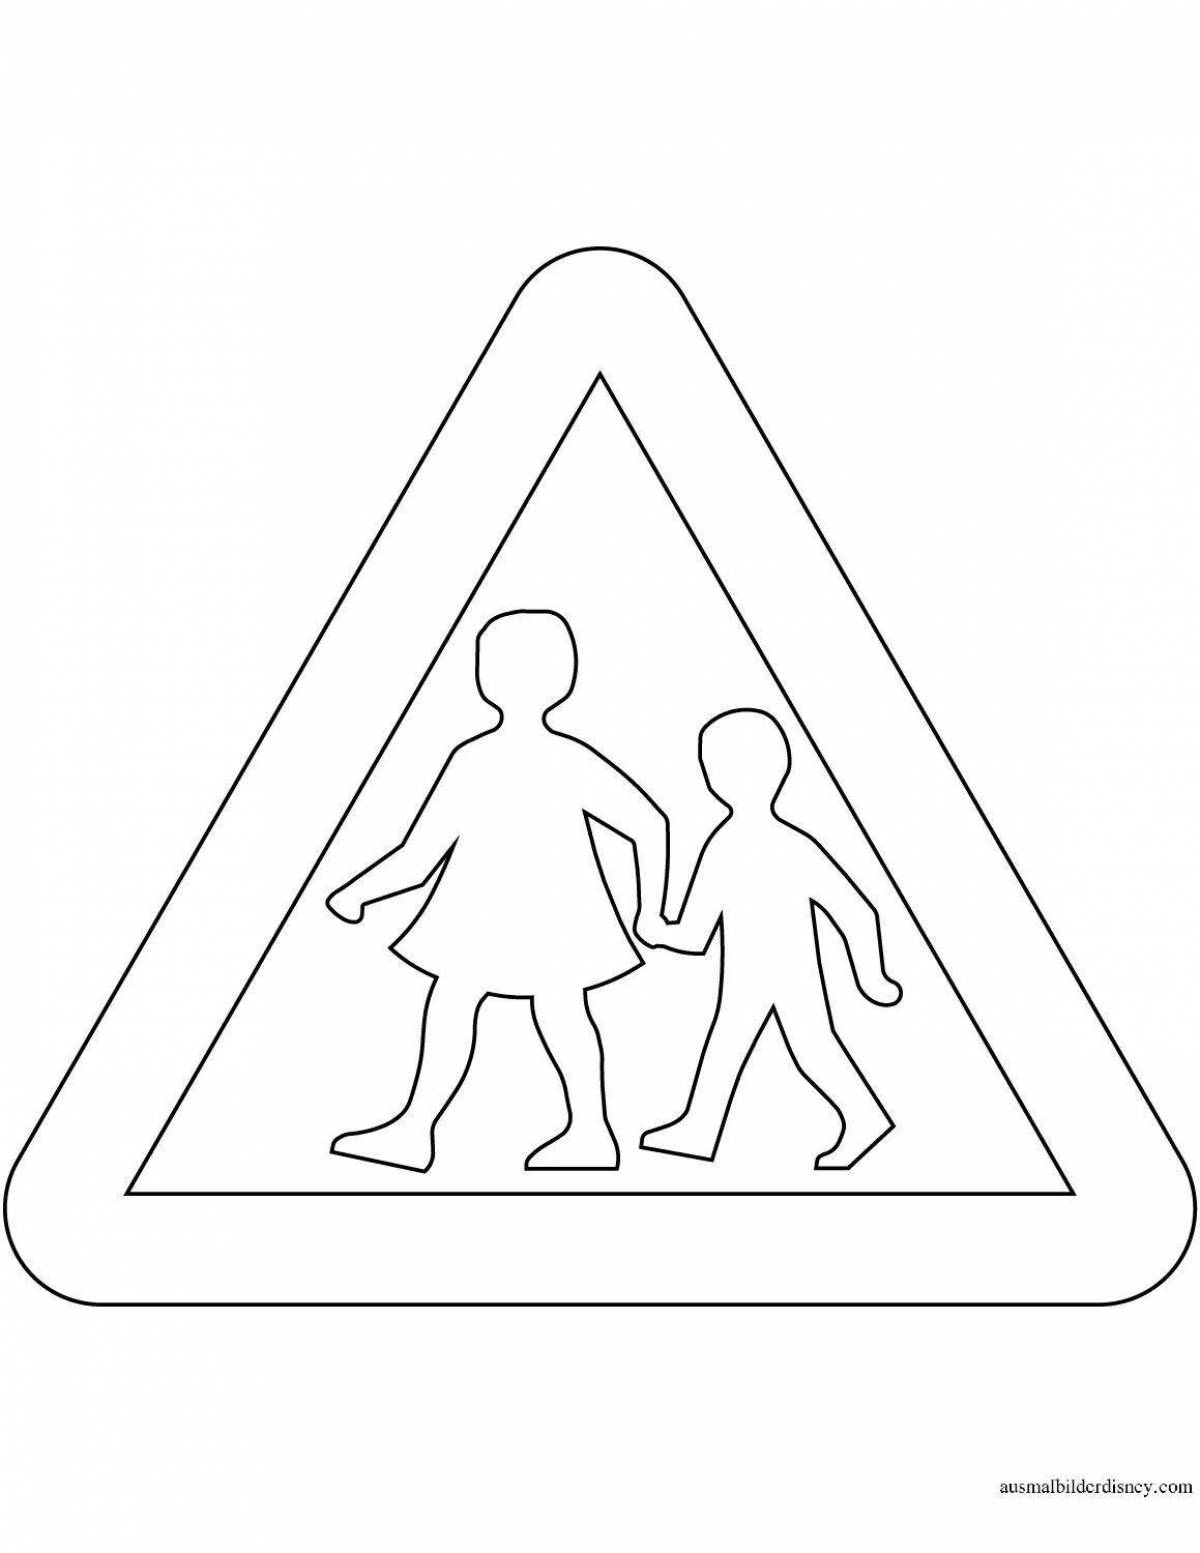 Coloring page for children's road sign 